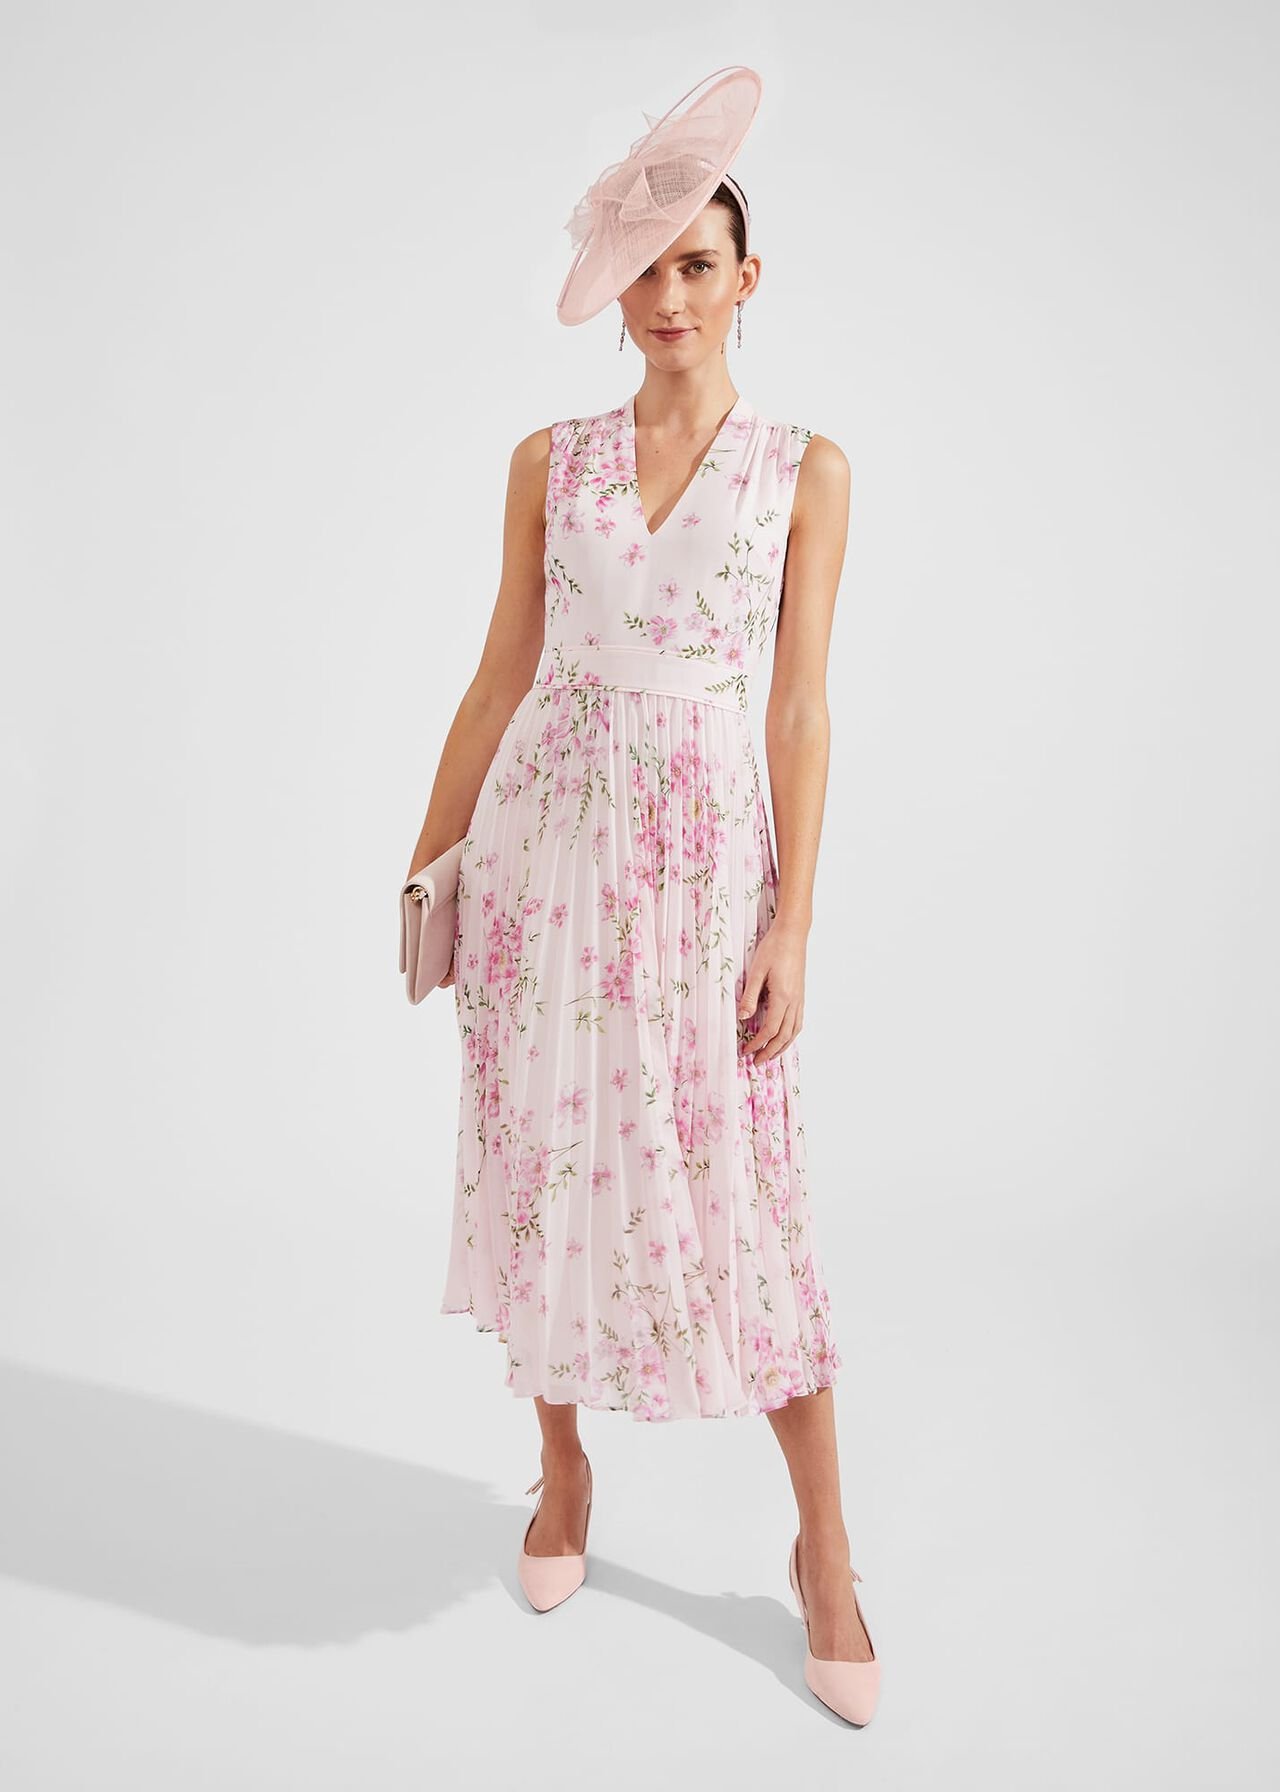 Veronica Pleated Floral Dress, Pink Multi, hi-res